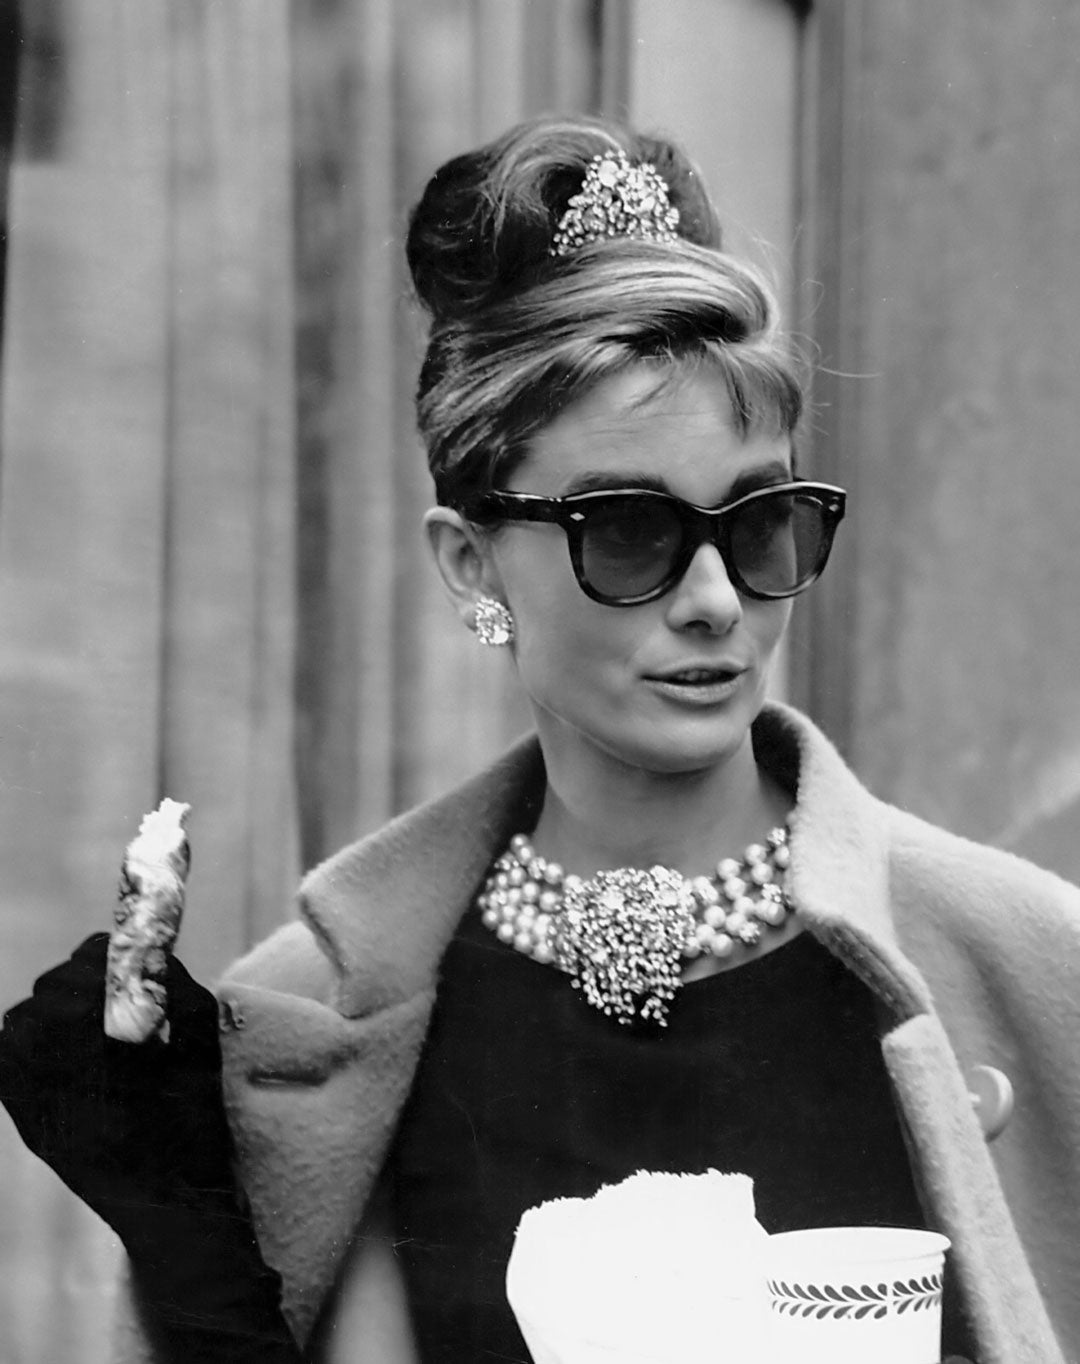 Actress Audrey Hepburn wearing sunglasses and black dress holding coffee cup